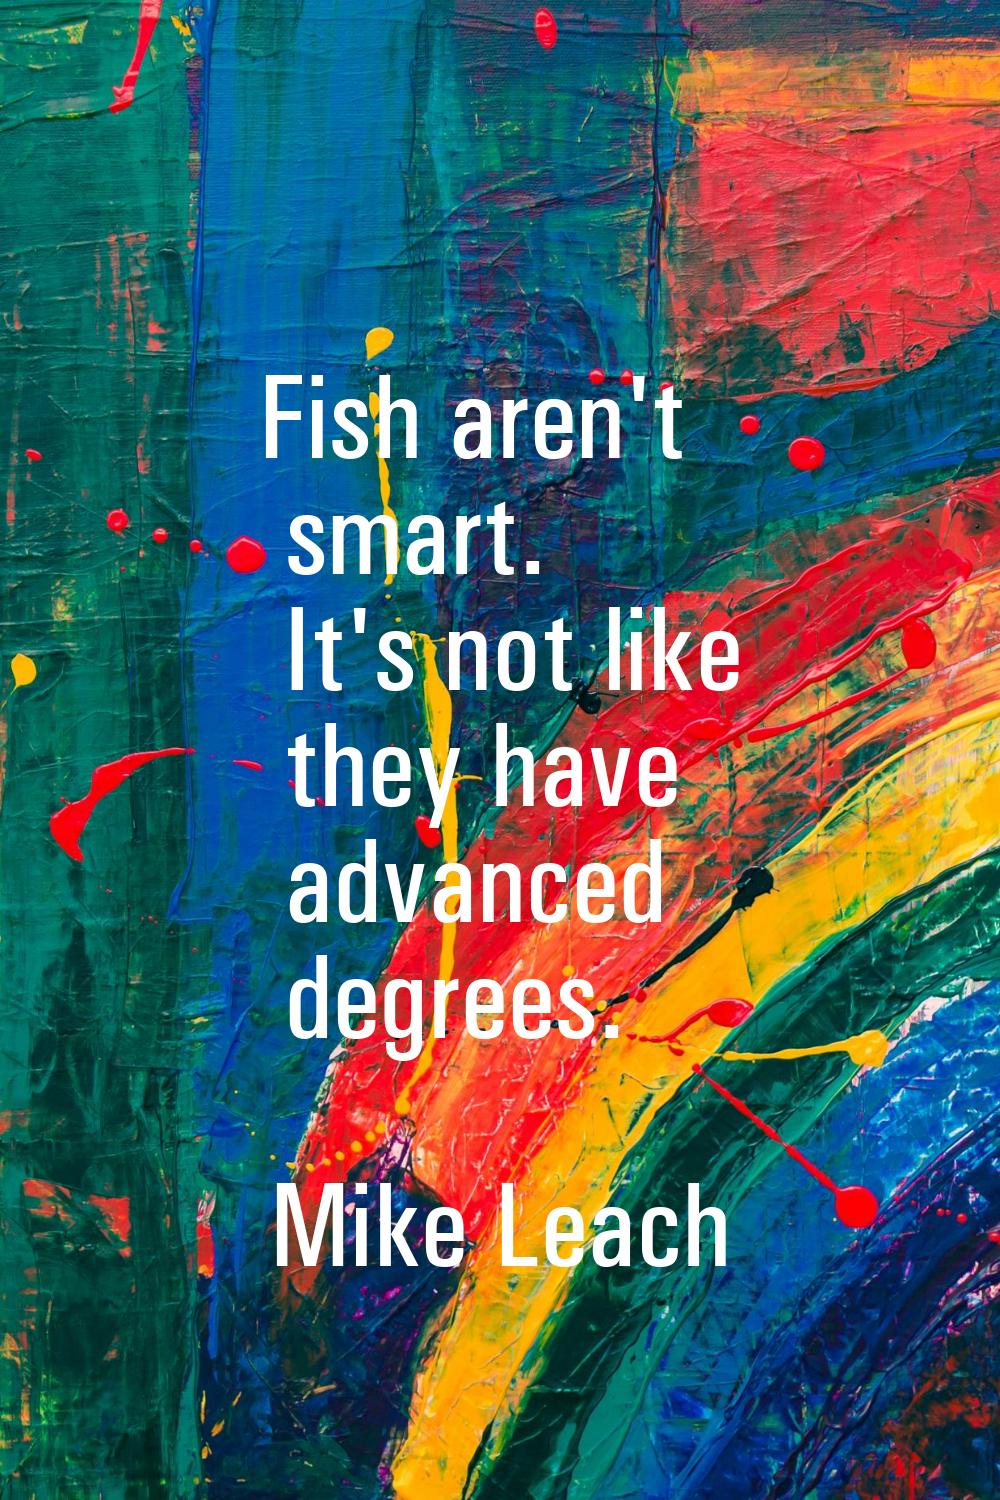 Fish aren't smart. It's not like they have advanced degrees.